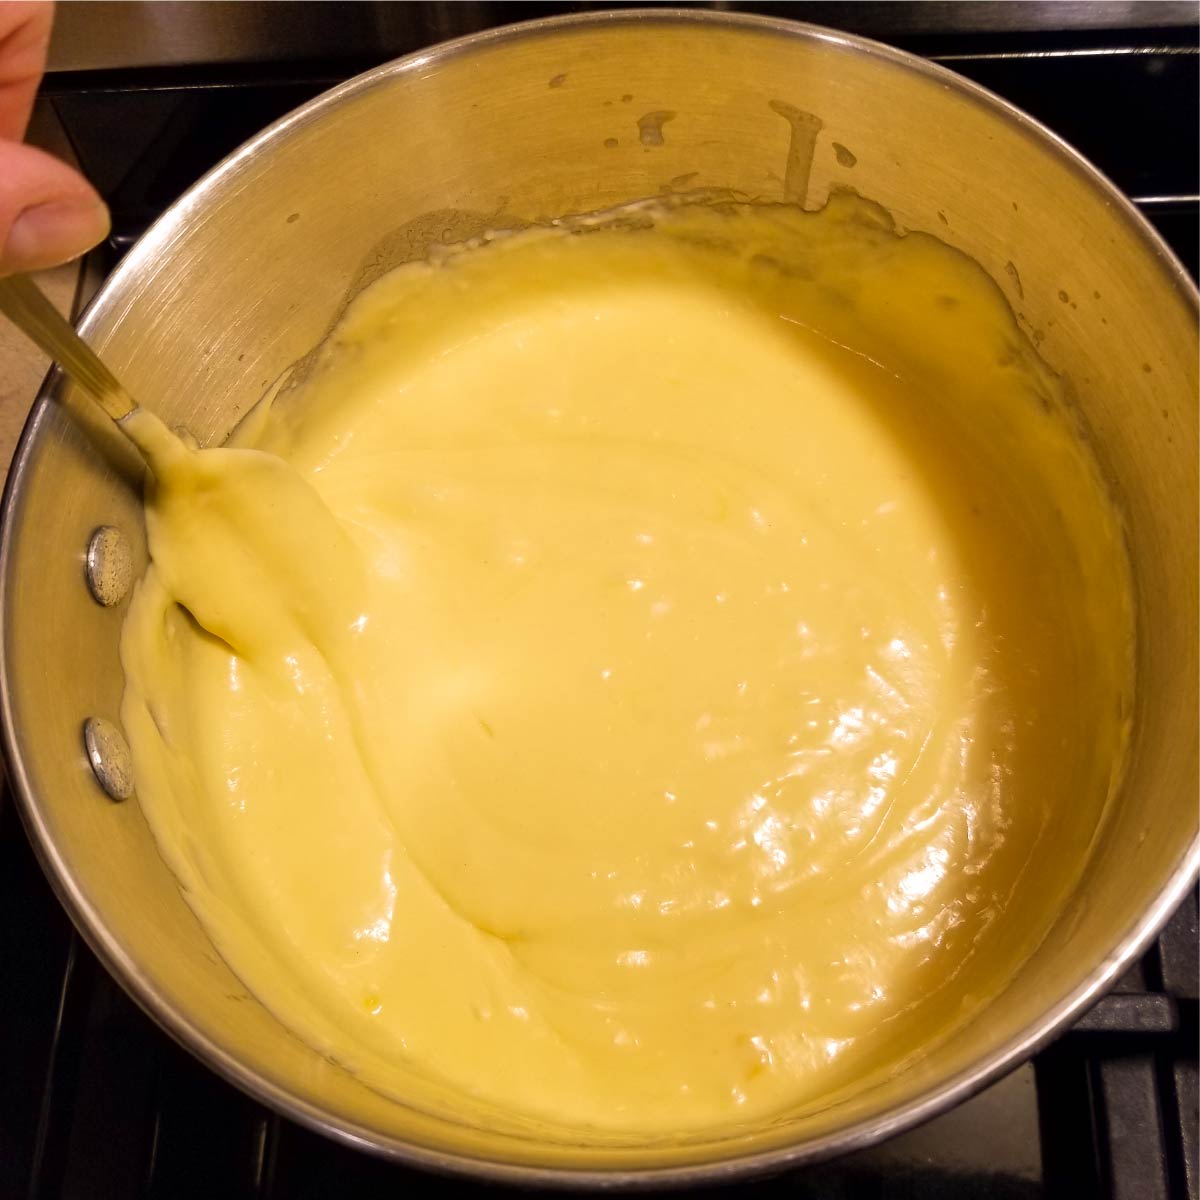 Cheese sauce for the homemade mac and cheese.